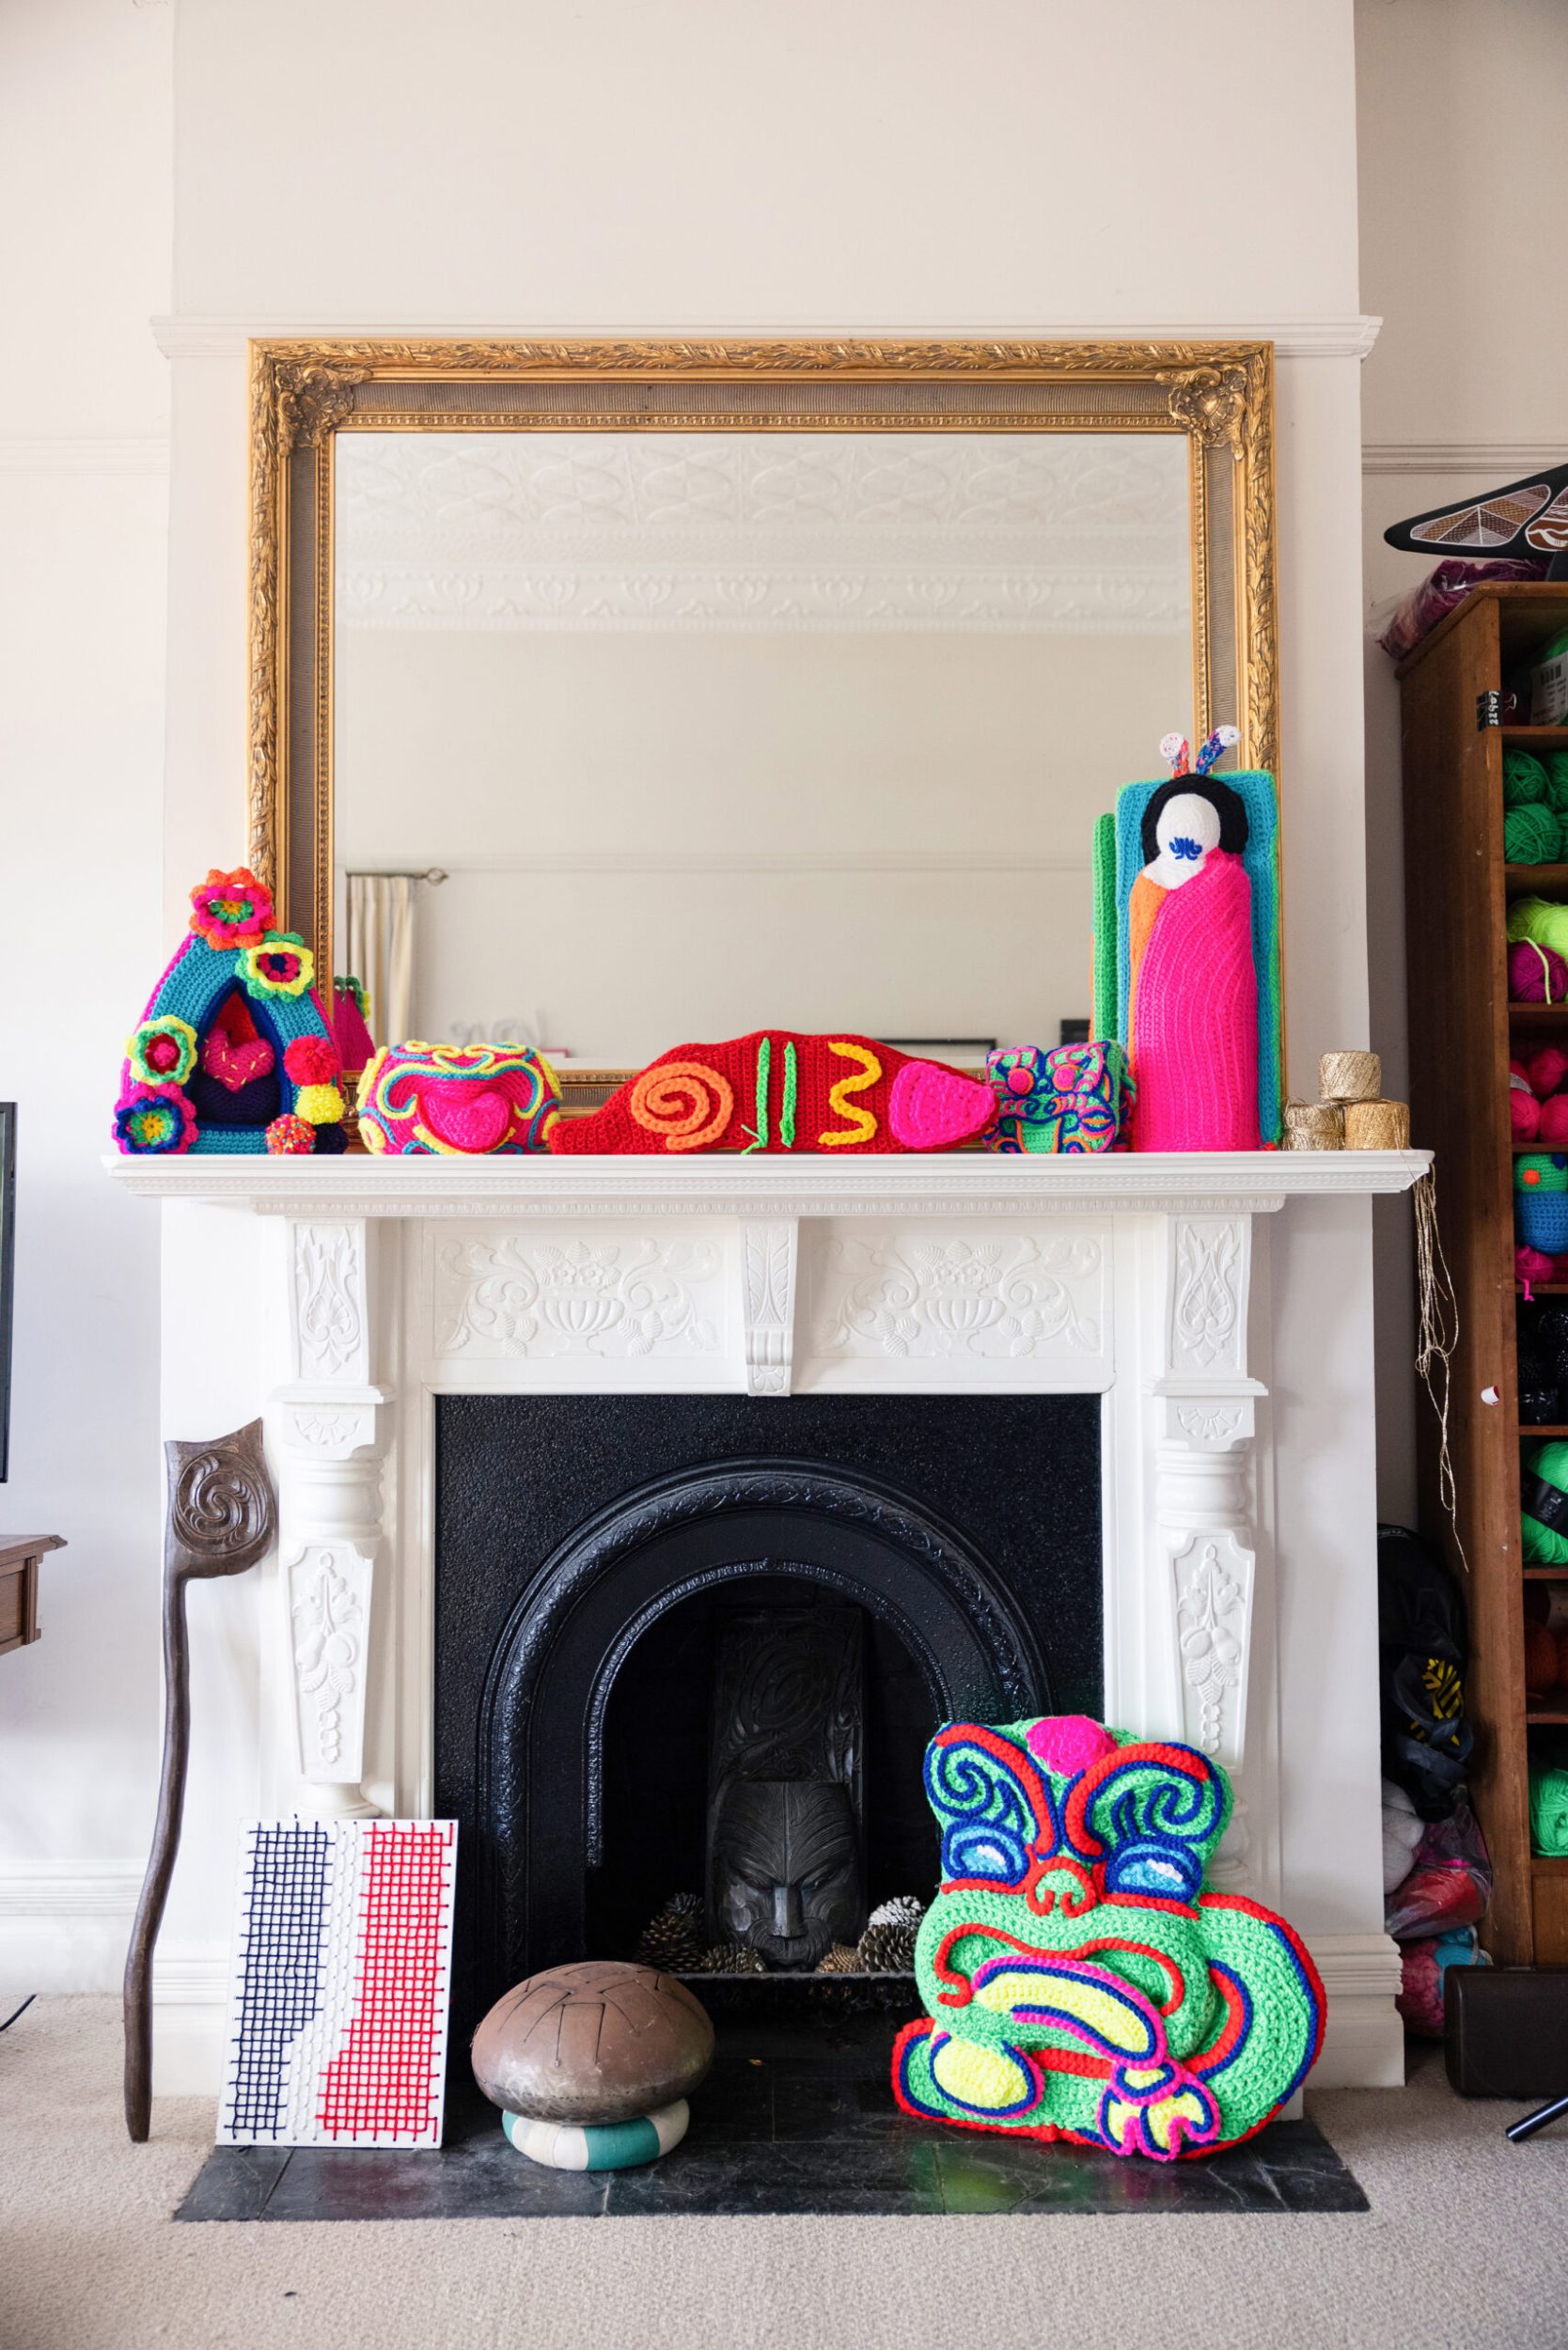 A white ornate fireplace with a large gold mirror on shelf and assorted crochet art around it